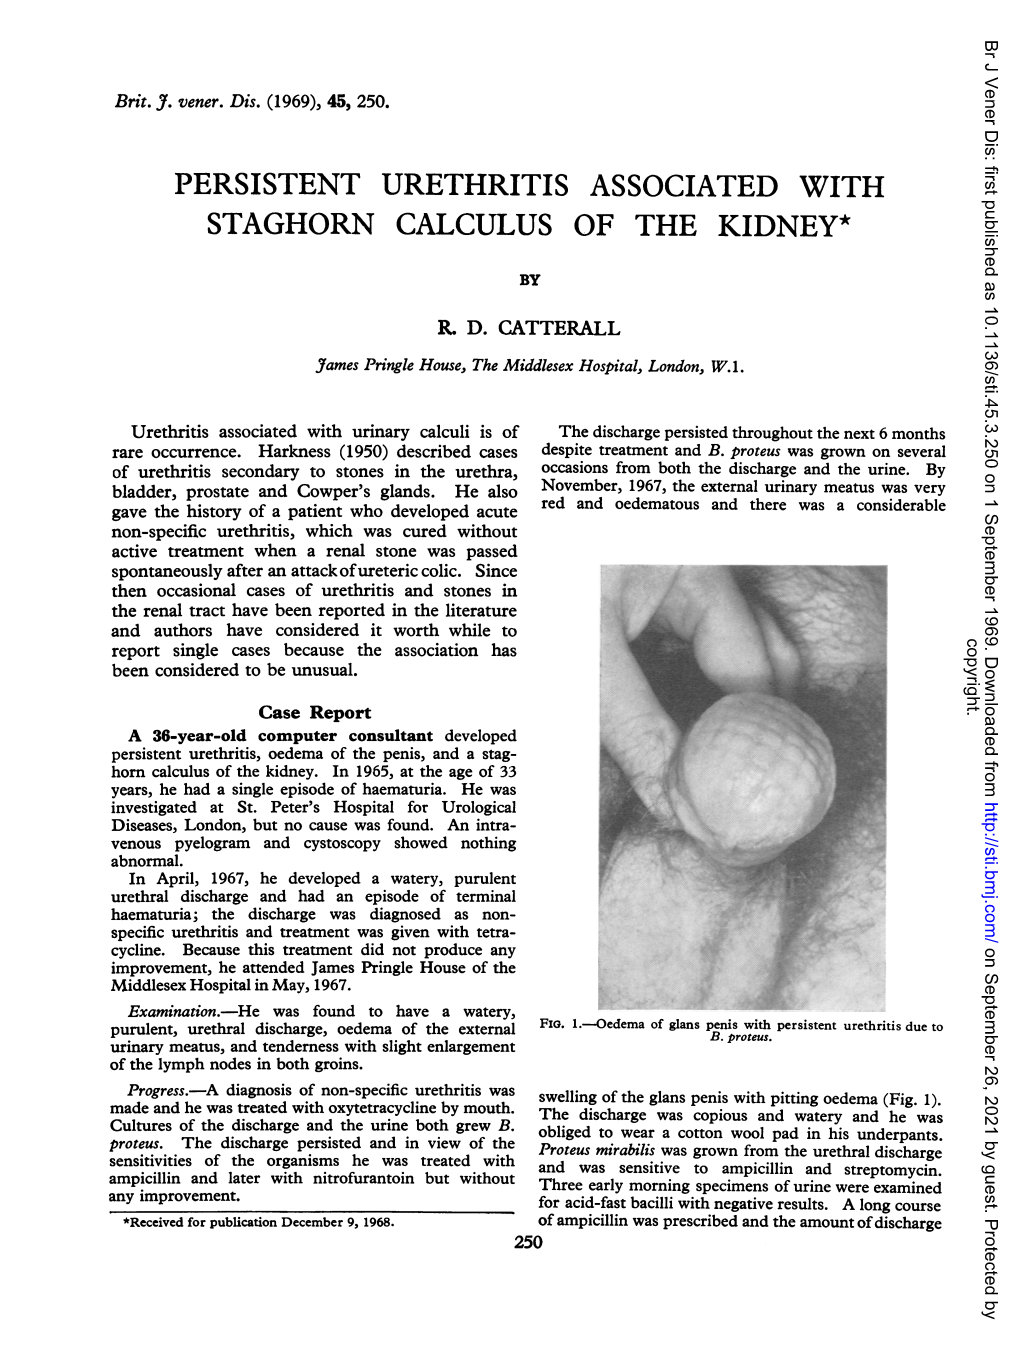 Persistent Urethritis Associated with Staghorn Calculus of the Kidney*